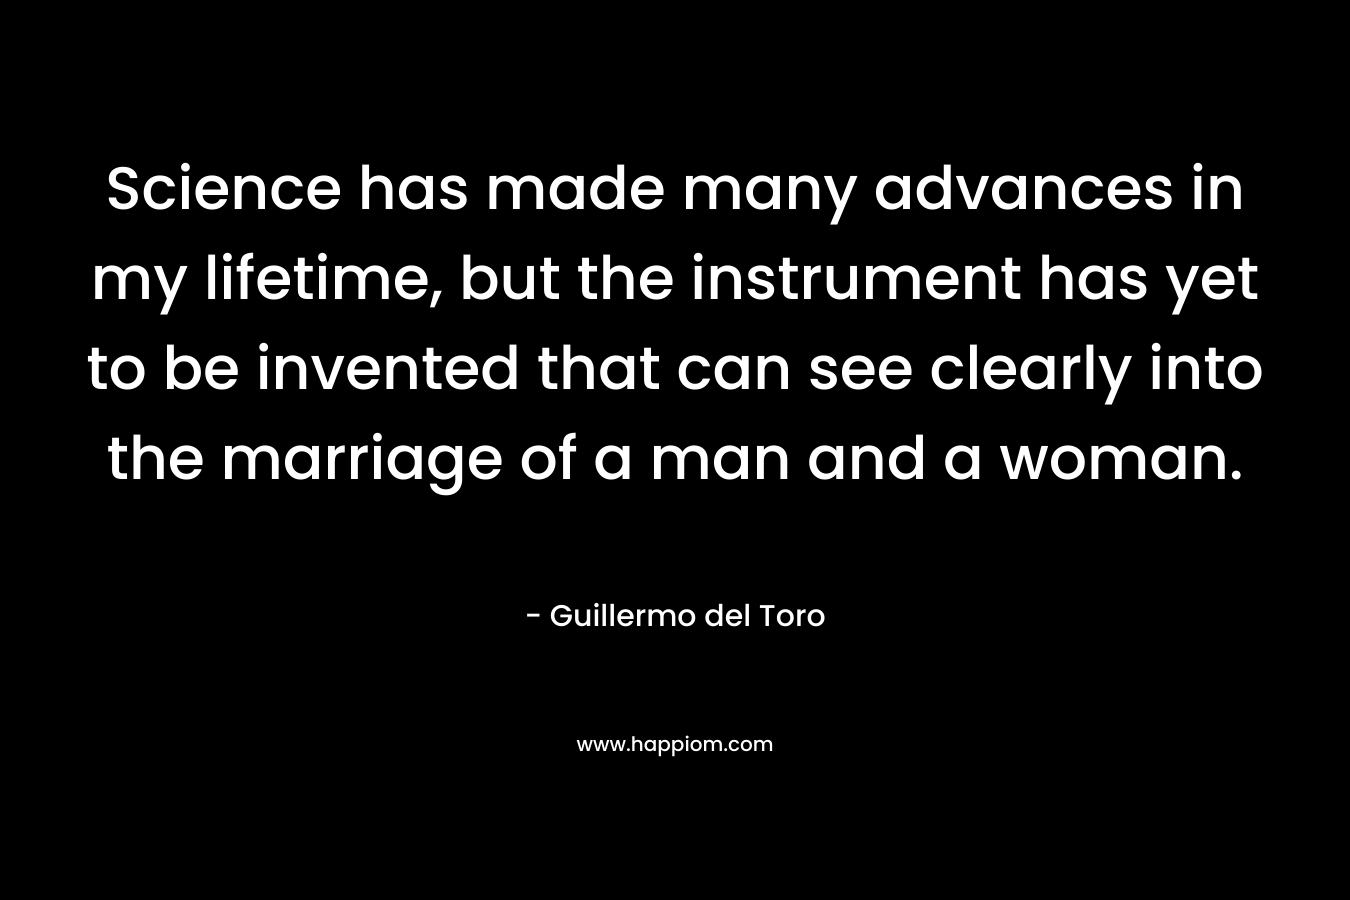 Science has made many advances in my lifetime, but the instrument has yet to be invented that can see clearly into the marriage of a man and a woman.